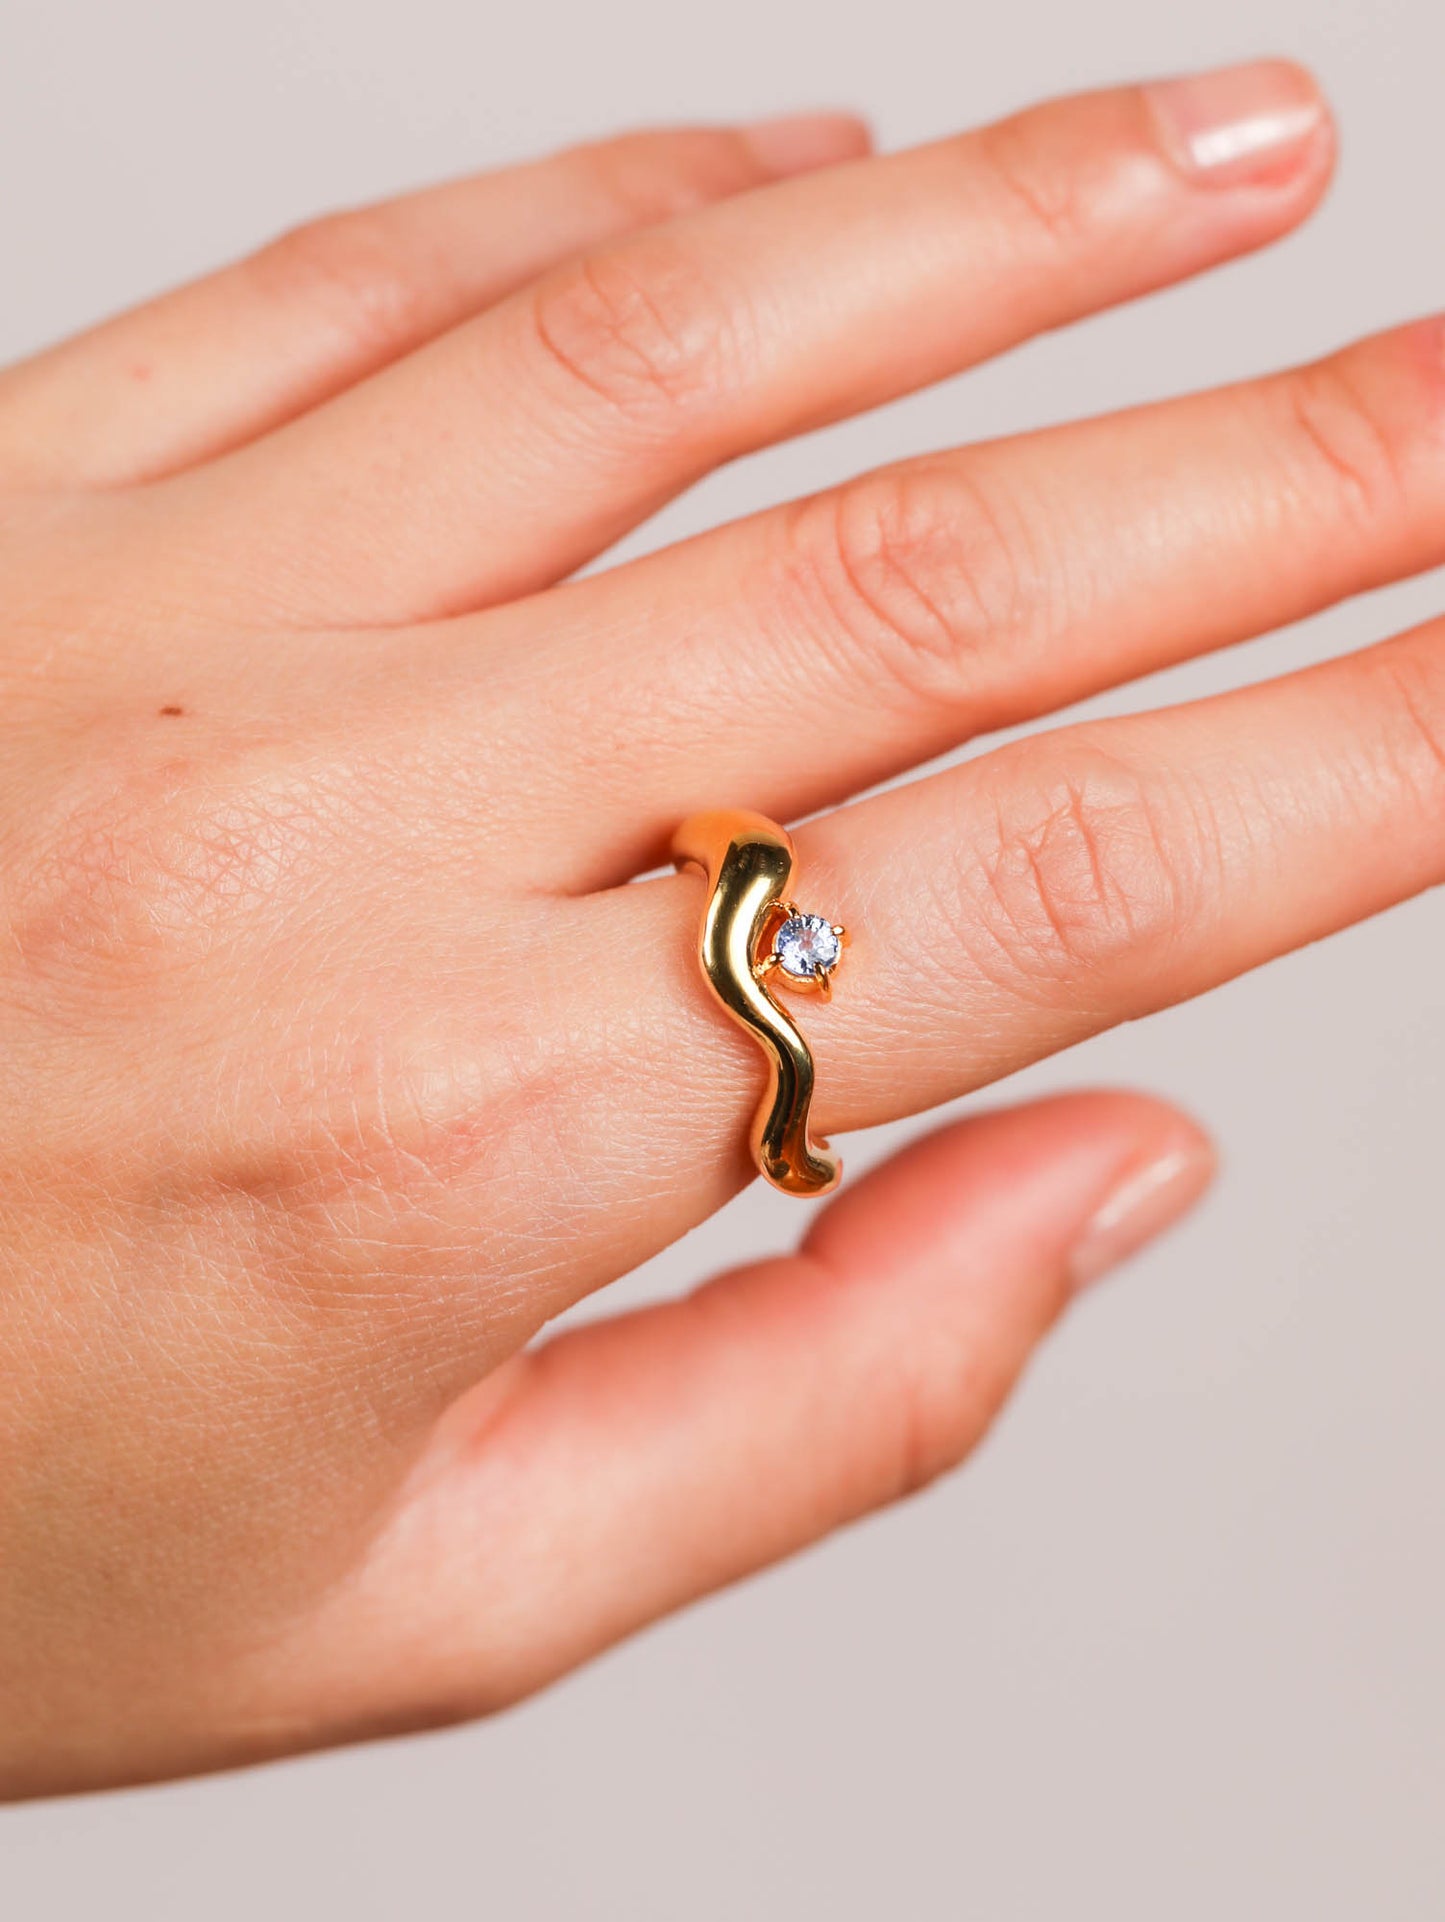 Wave Ring Gold with single Sapphire Stone # 4 | Size 6.5